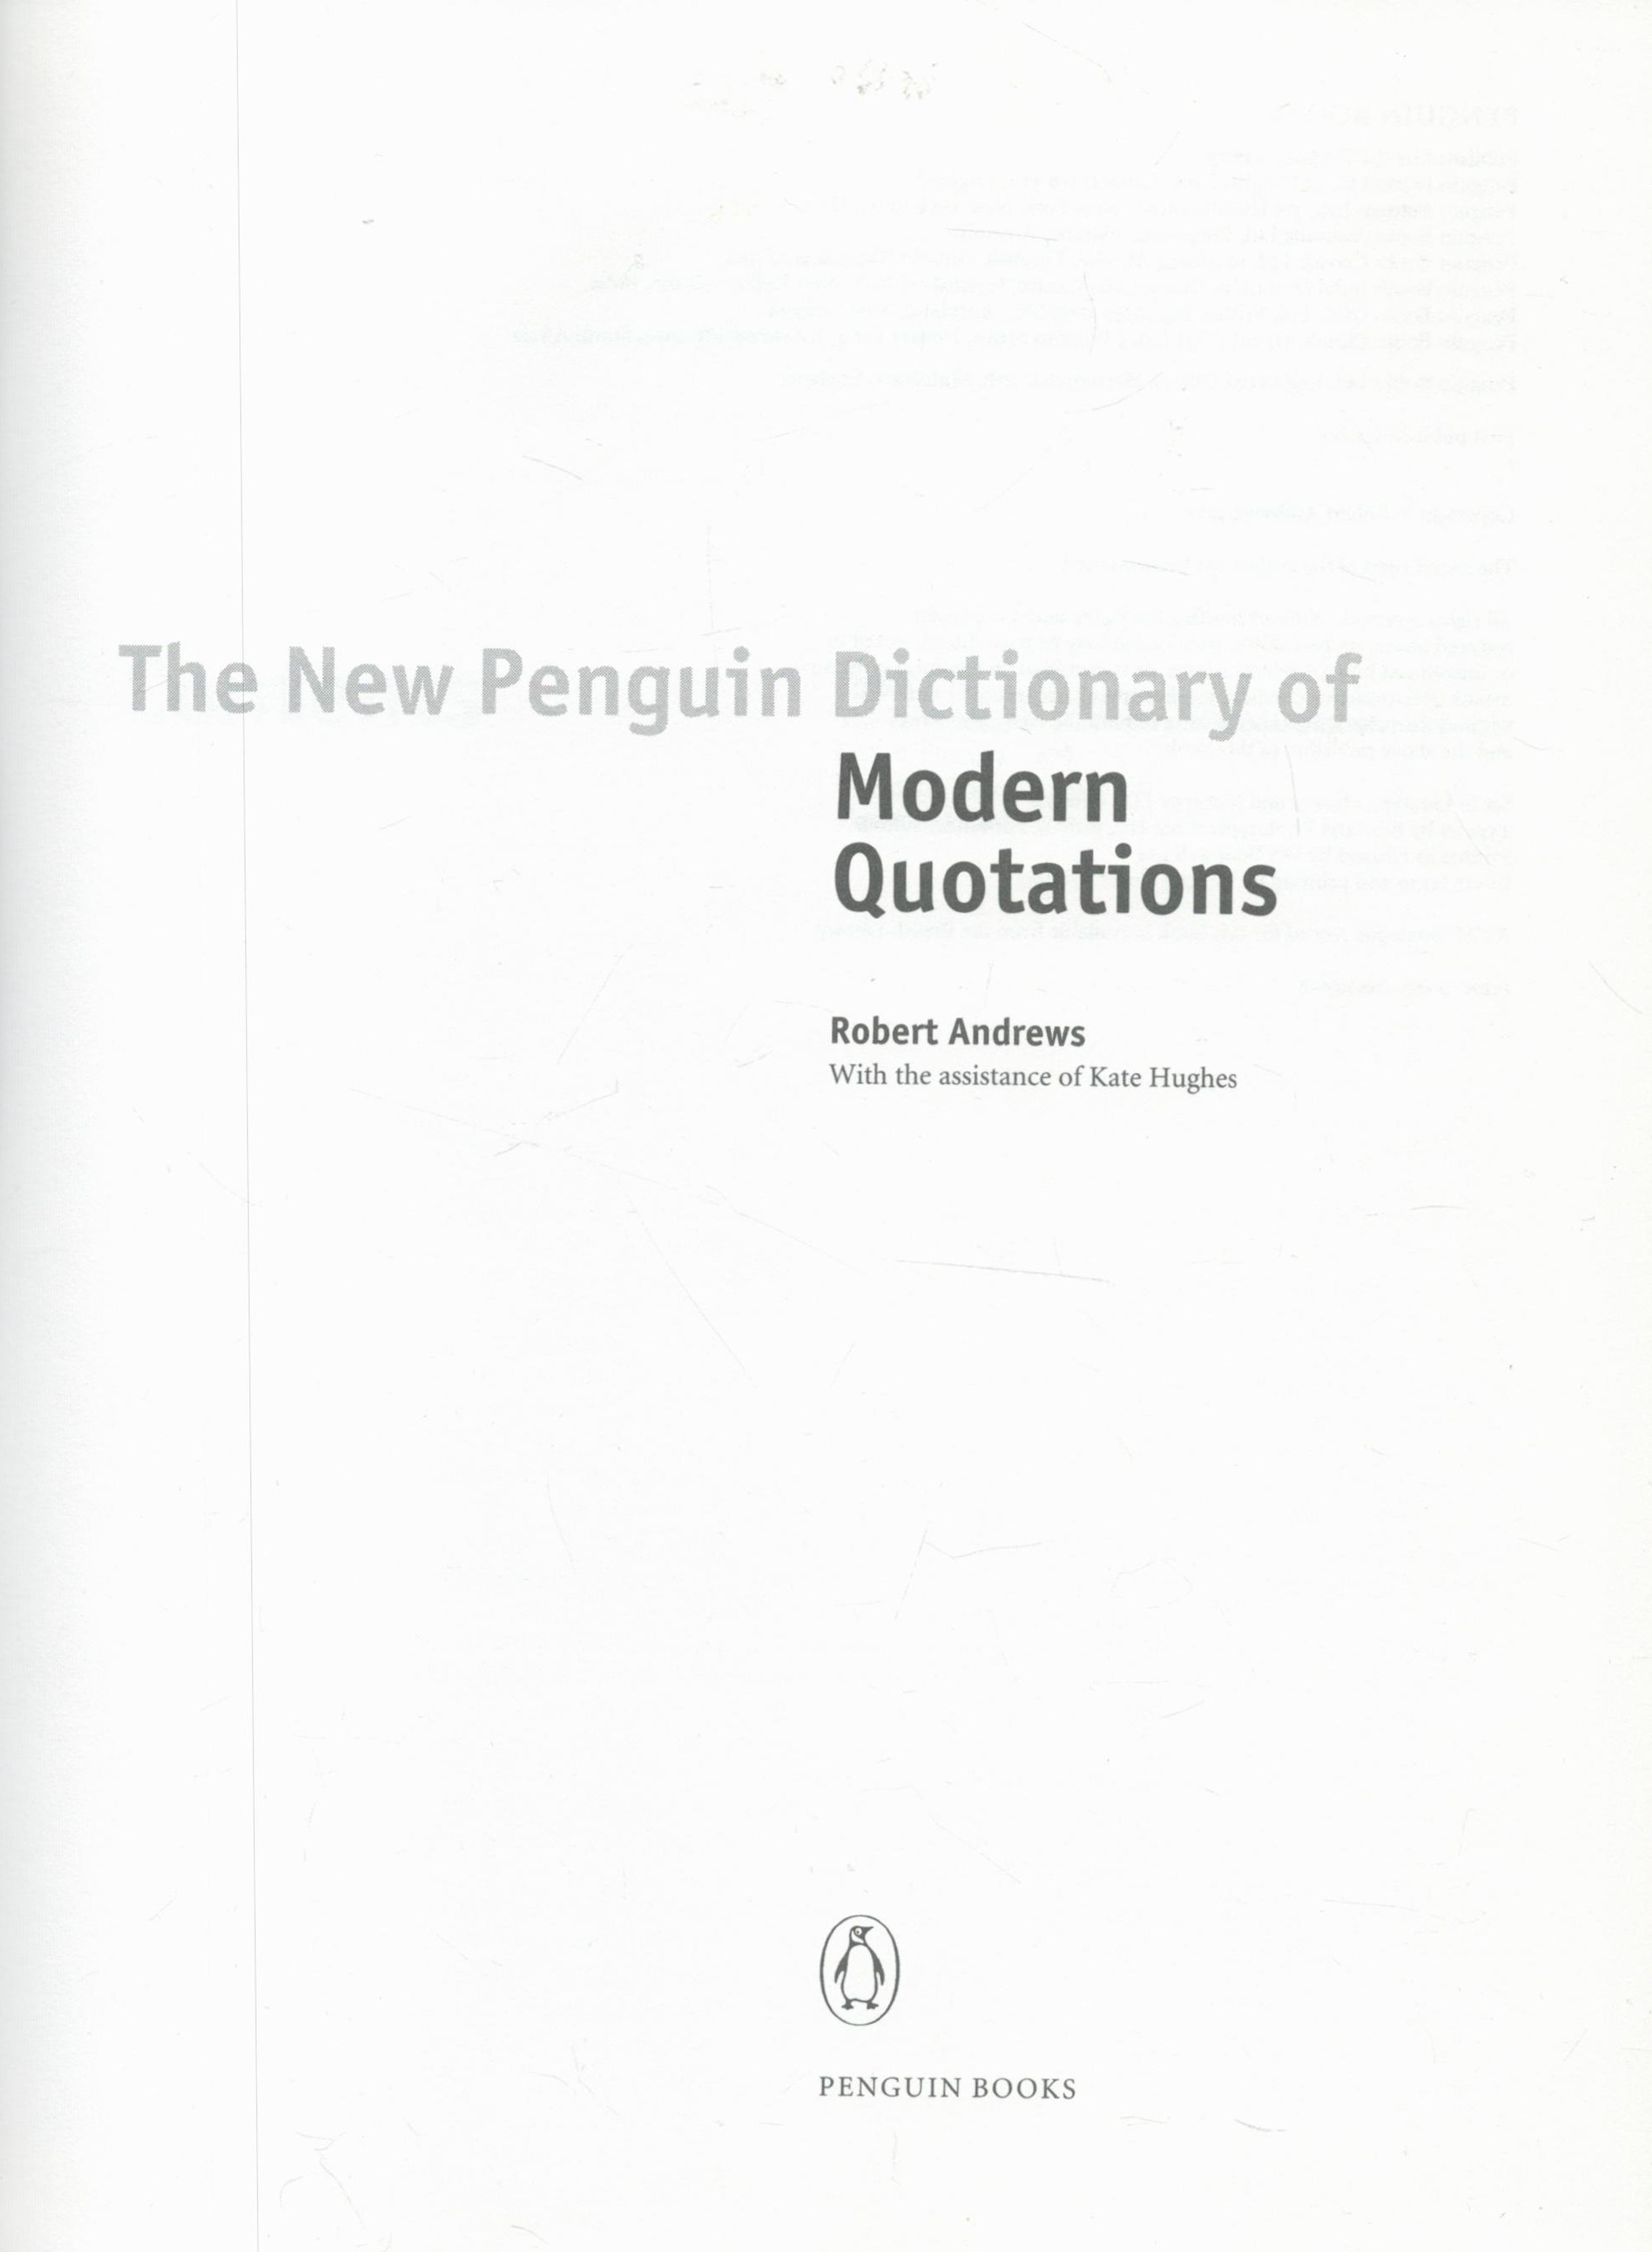 The New Penguin Dictionary of Modern Quotations by Robert Andrews 2000 First Edition Hardback Book - Image 2 of 3